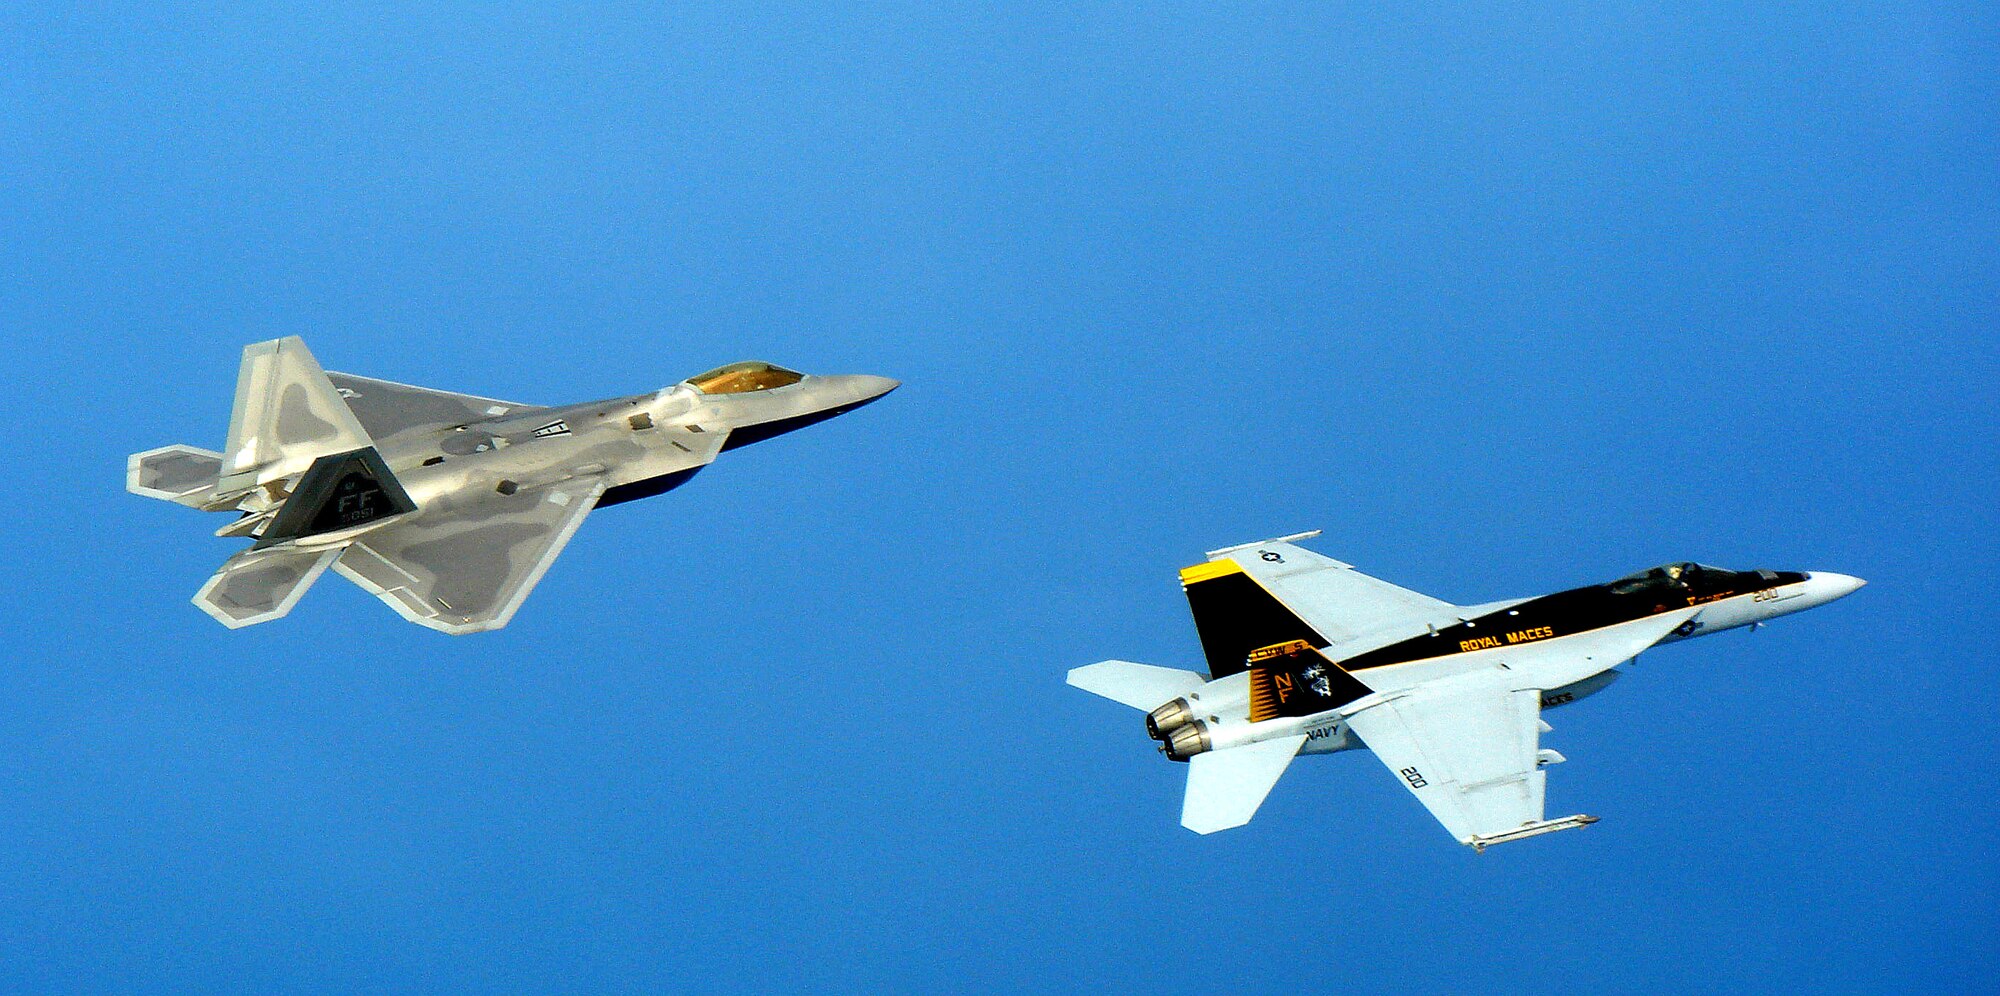 An F-22A Raptor deployed to Kadena Air Base, Japan, trains with a U.S. Navy F/A-18 Super Hornet April 26, near Okinawa, Japan. The Raptors, from the 27th Fighter Squadron, at Langley Air Force Base, Va., deployed to Kadena in February. The Super Hornets, the Navy's newest frontline carrier-based fighter, are stationed at Naval Air Facility Atsugi, Japan. The training exercises focused on the next generation fighter capabilities between the two aircraft. (U.S. Navy photo/Christopher Hurst)